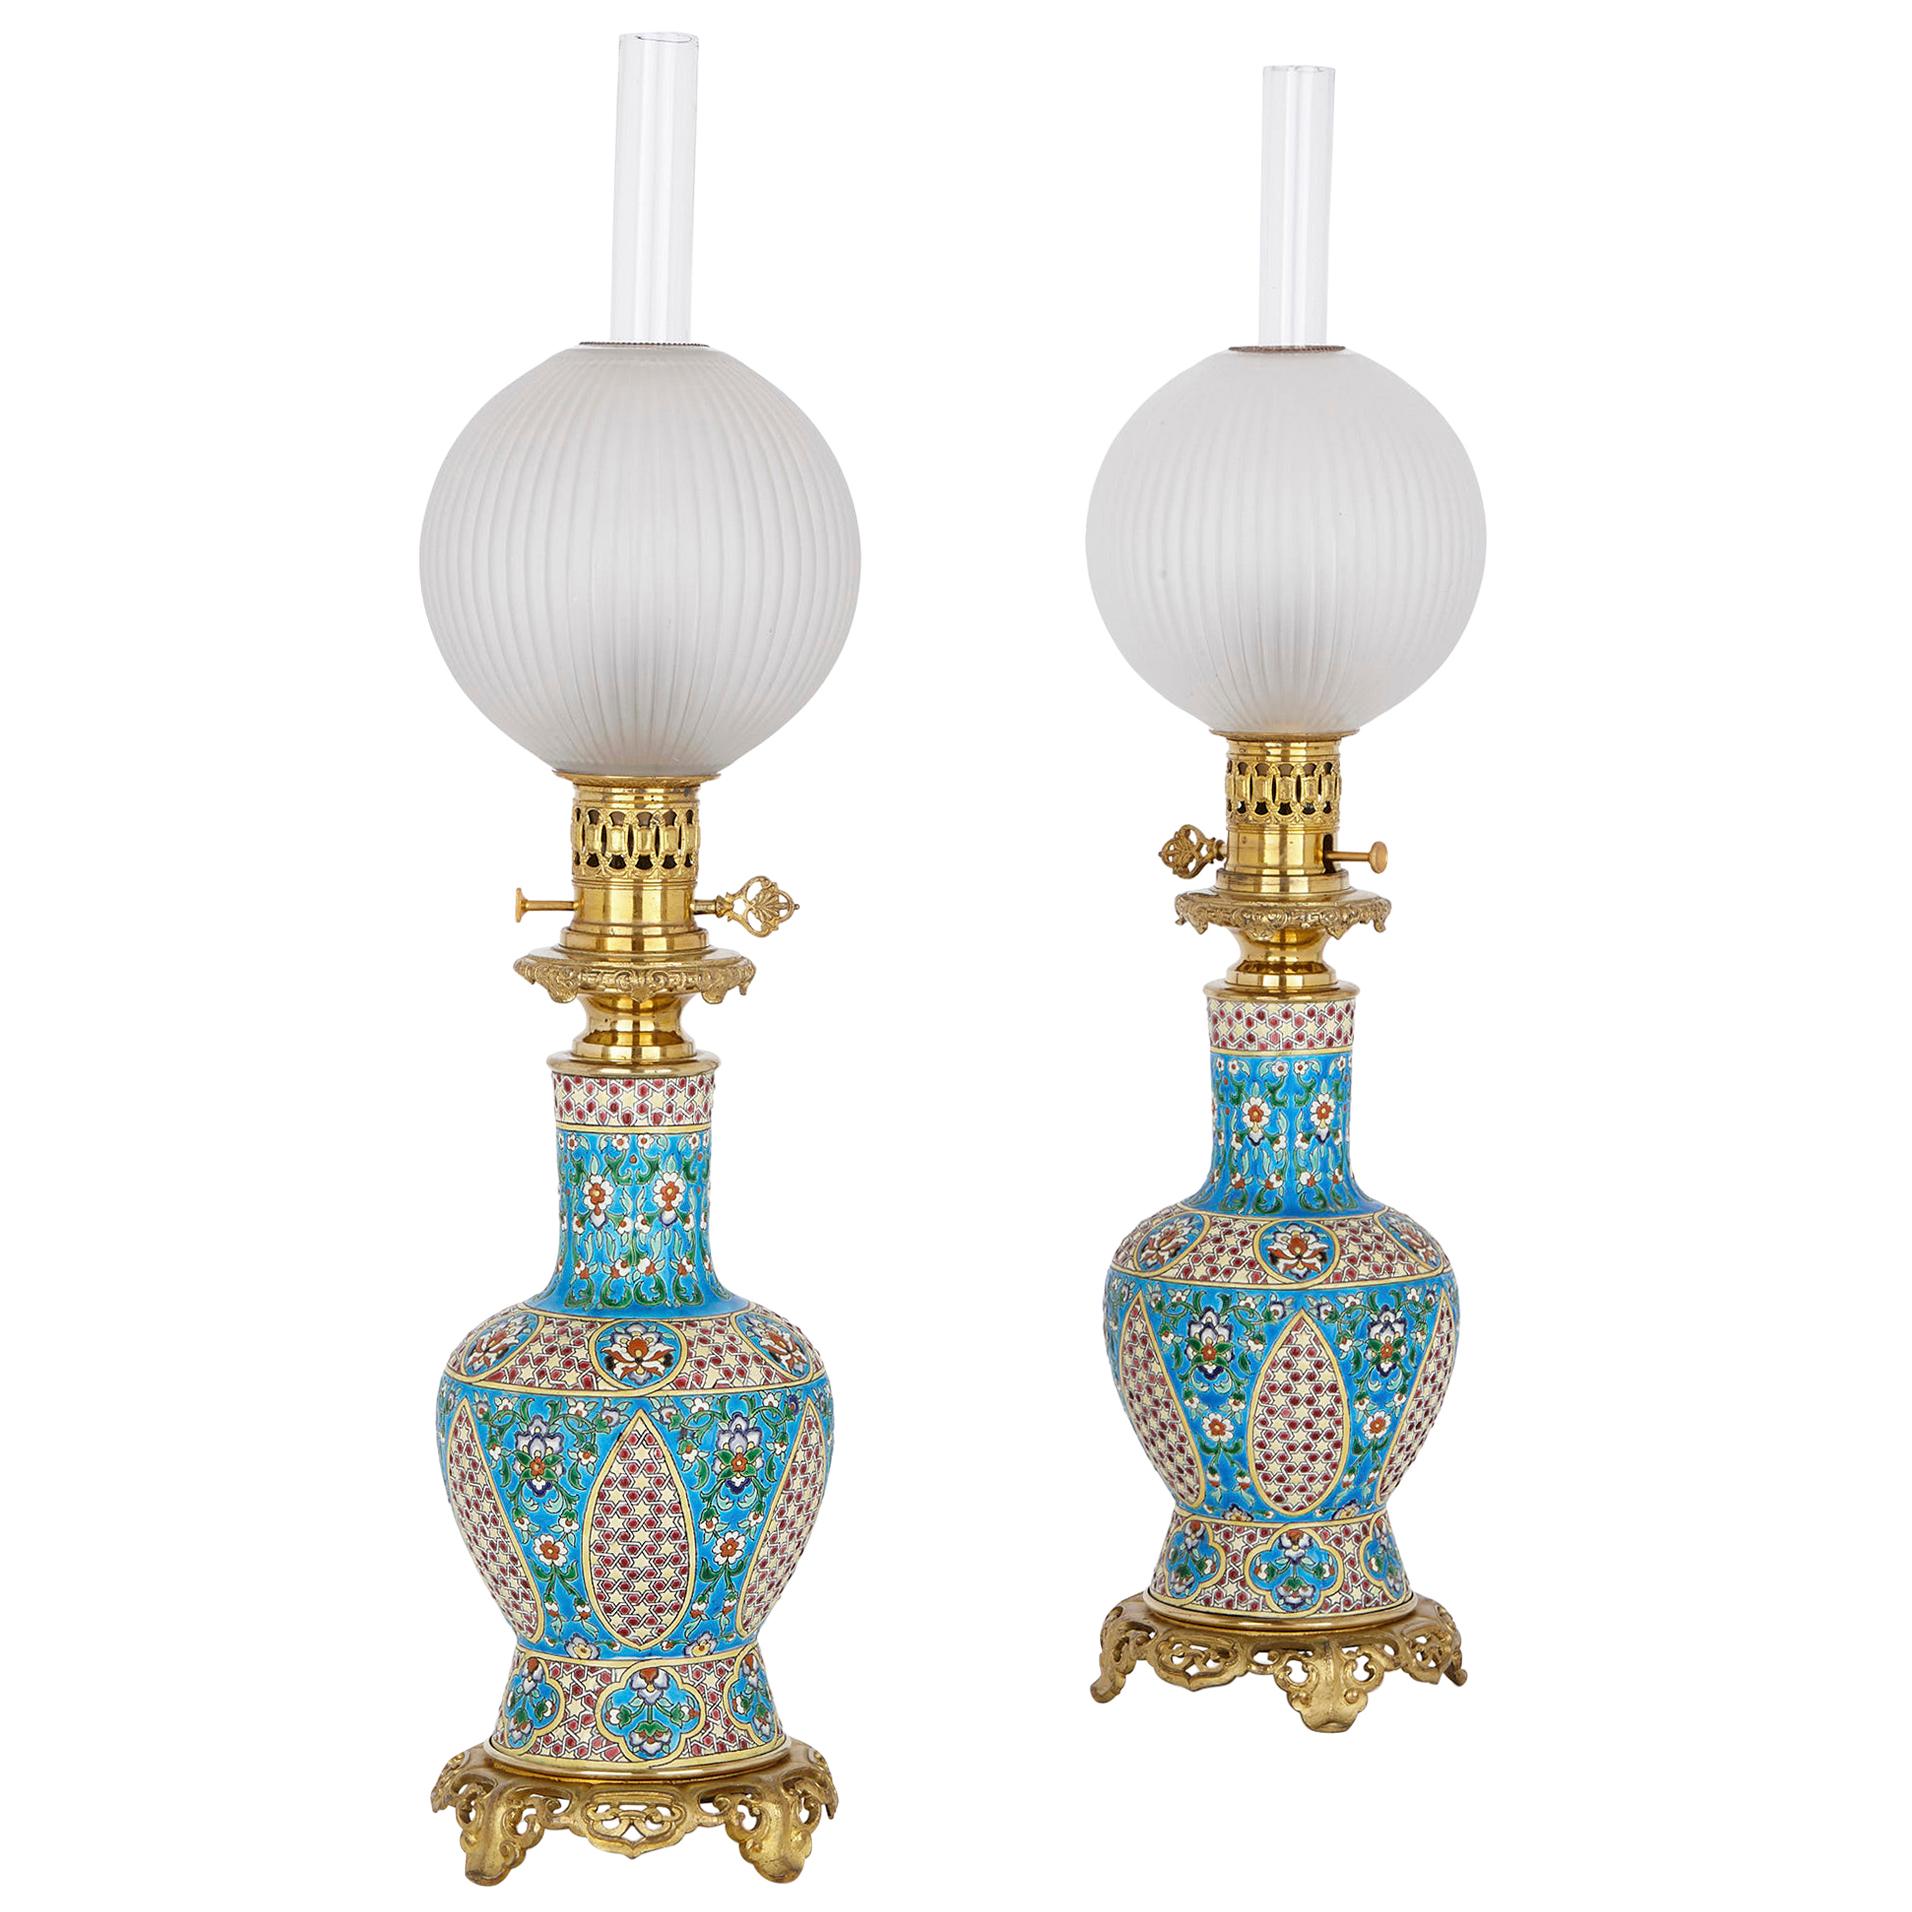 Two Bordeaux Faience and Gilt Bronze Oil Lamps, Attributed to Vieillard & Cie